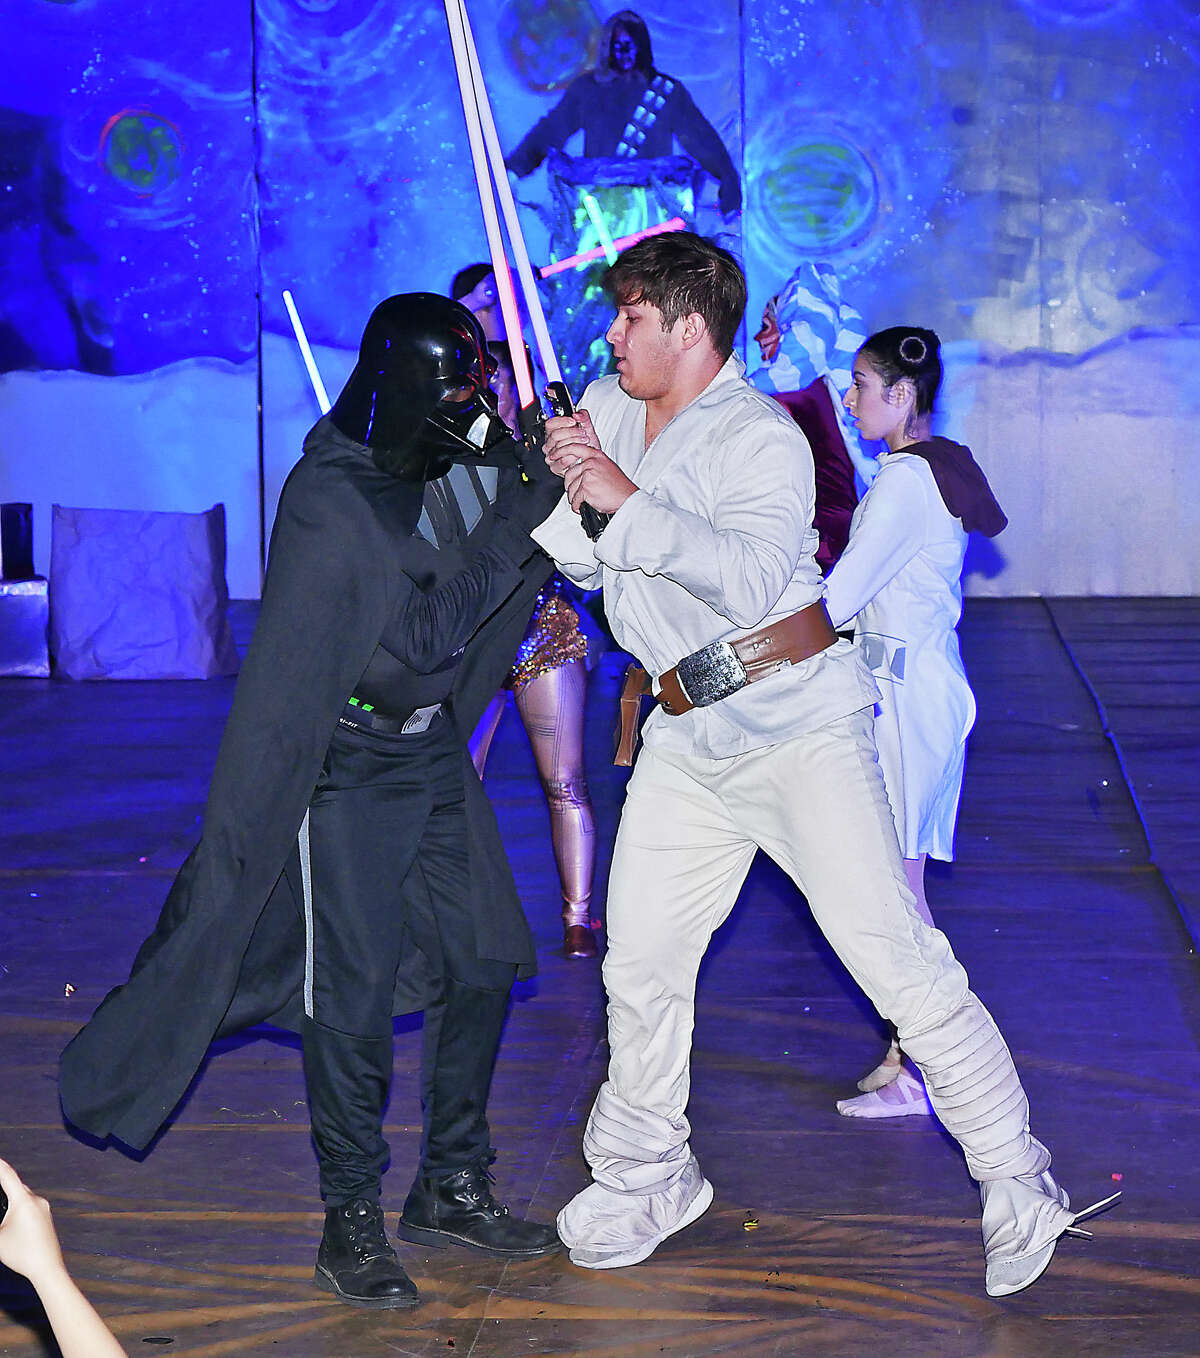 St. Augustine High School held their annual Halloween skit contest, Tuesday, October 31, 2017, at the school's Wellness Center. The Senior Class took top honors with their rendition of Star Wars.